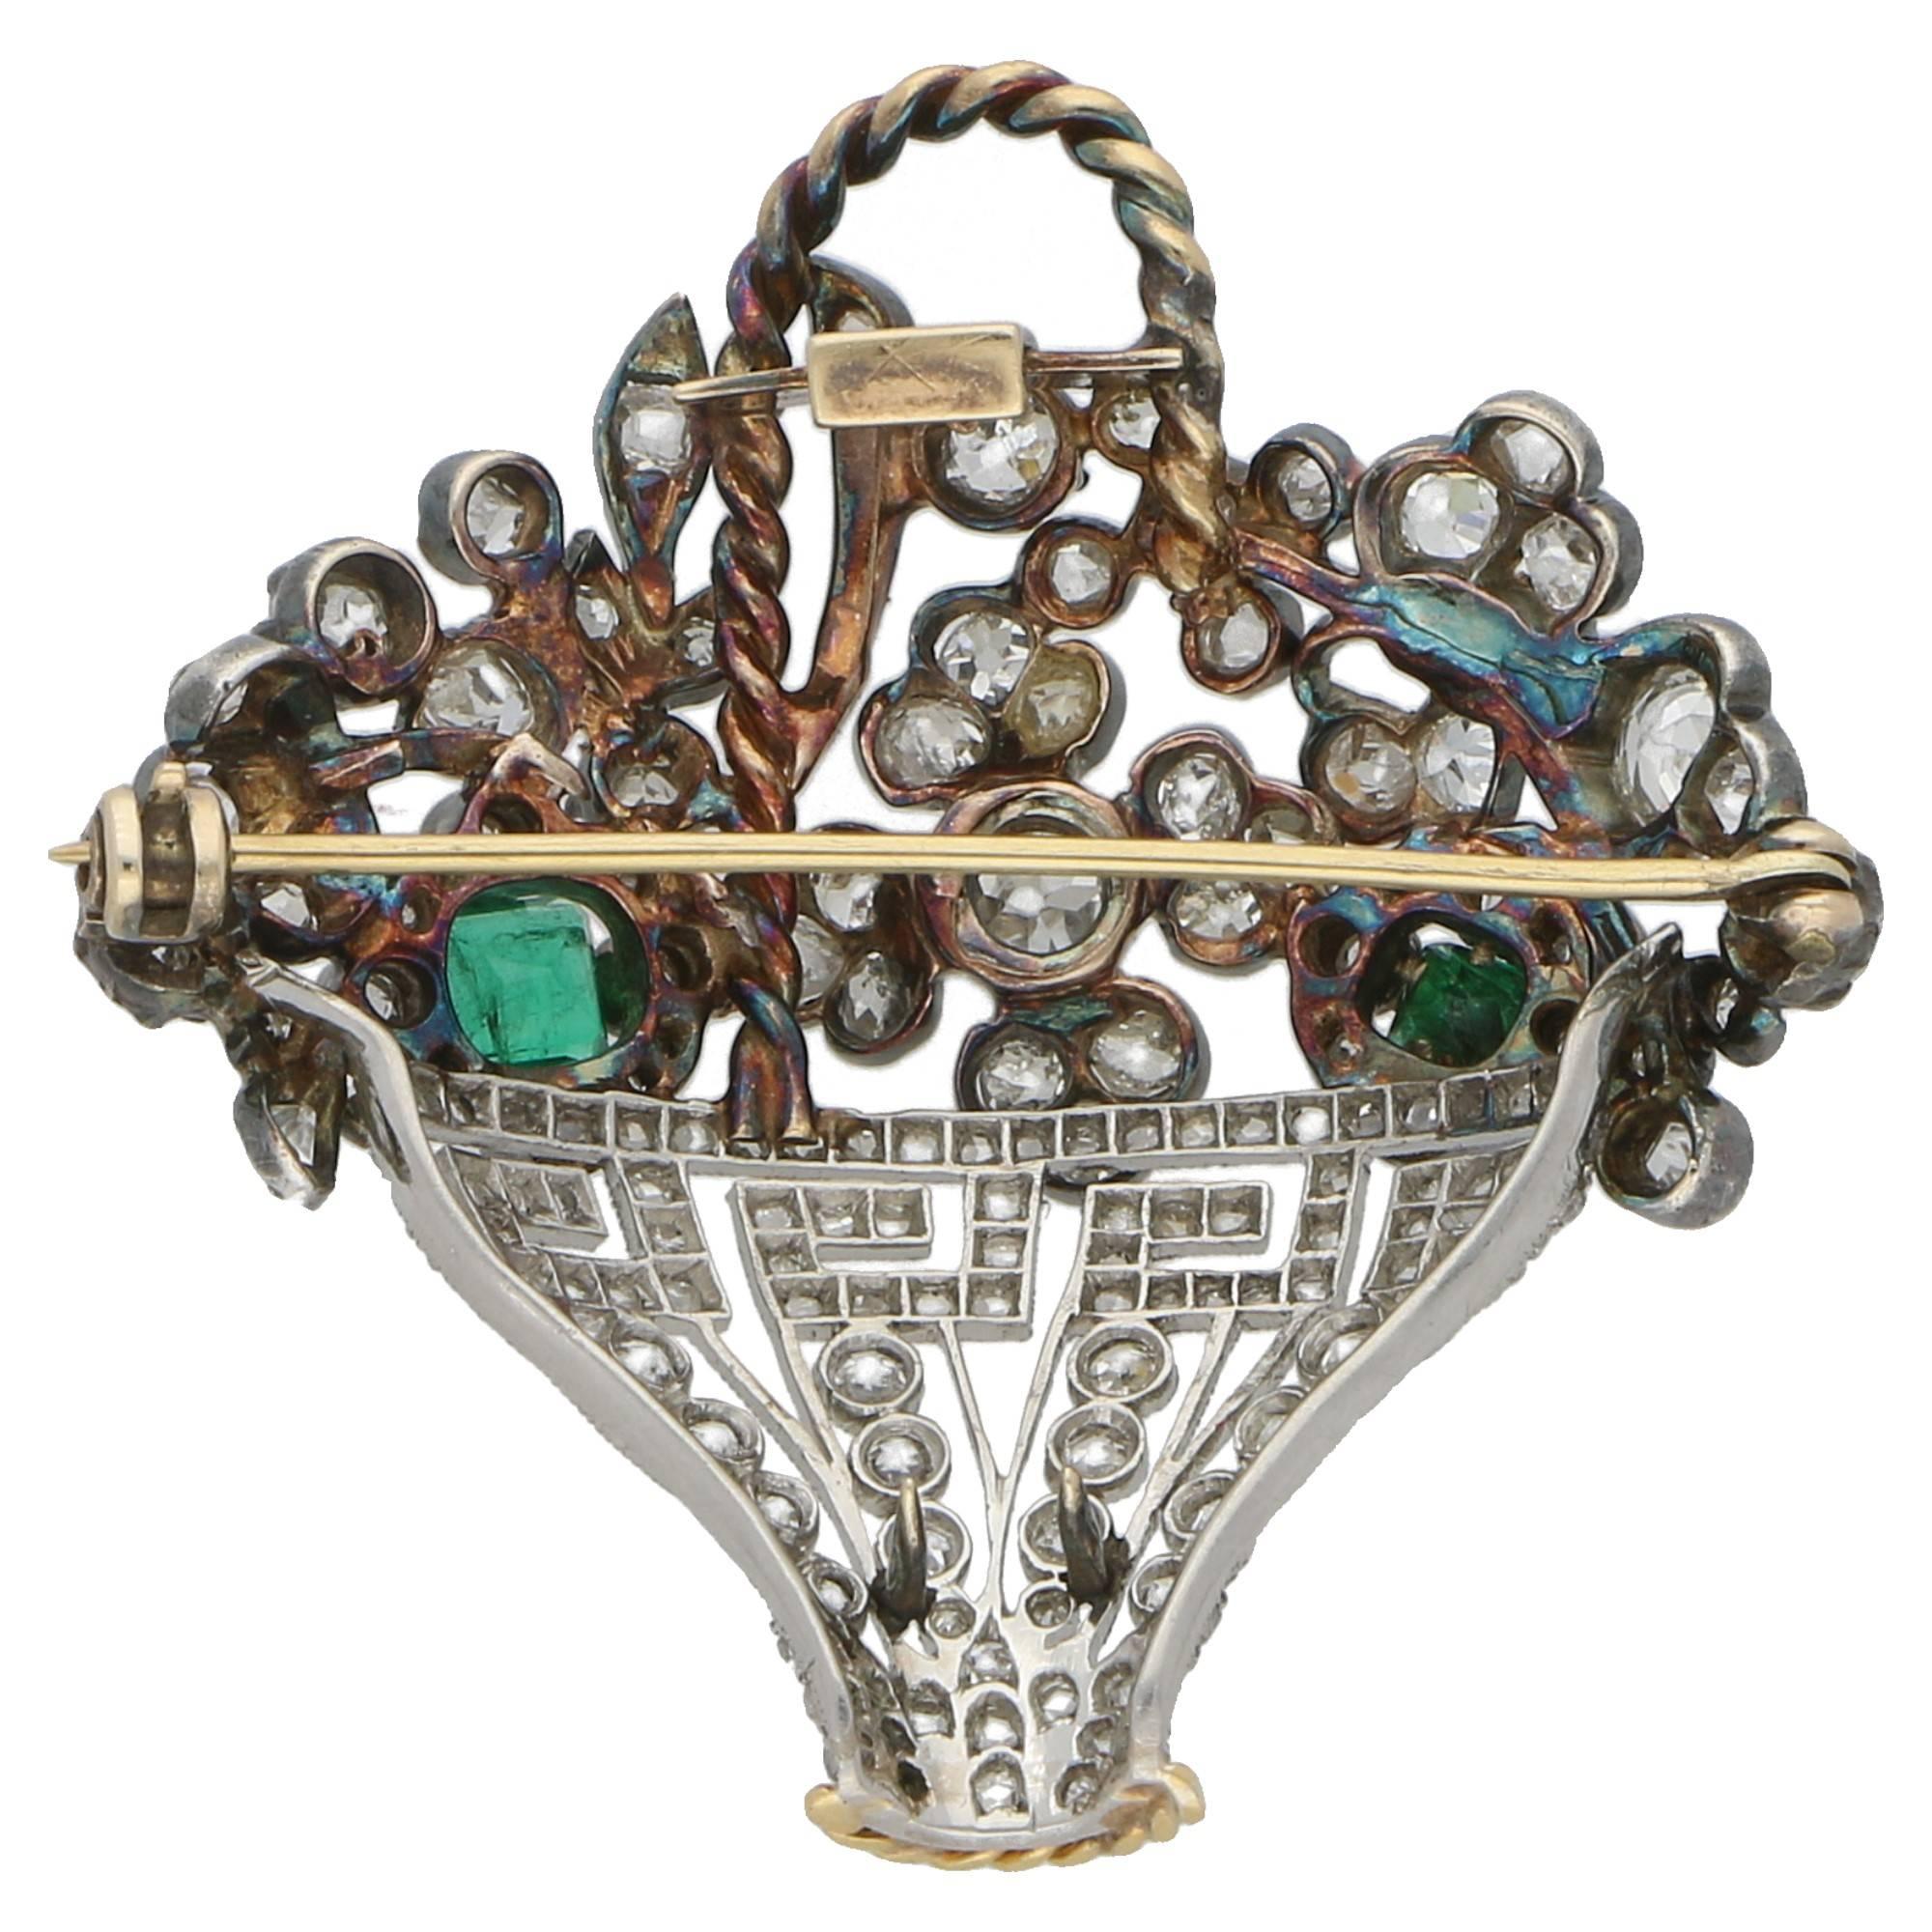 An antique diamond and emerald flower basket brooch set in silver on gold and platinum. The floral display is early Victorian and exhibits a pair of emerald cut emeralds amidst a diamond verdure of Old Mine cut diamonds set in silver on gold. 

The